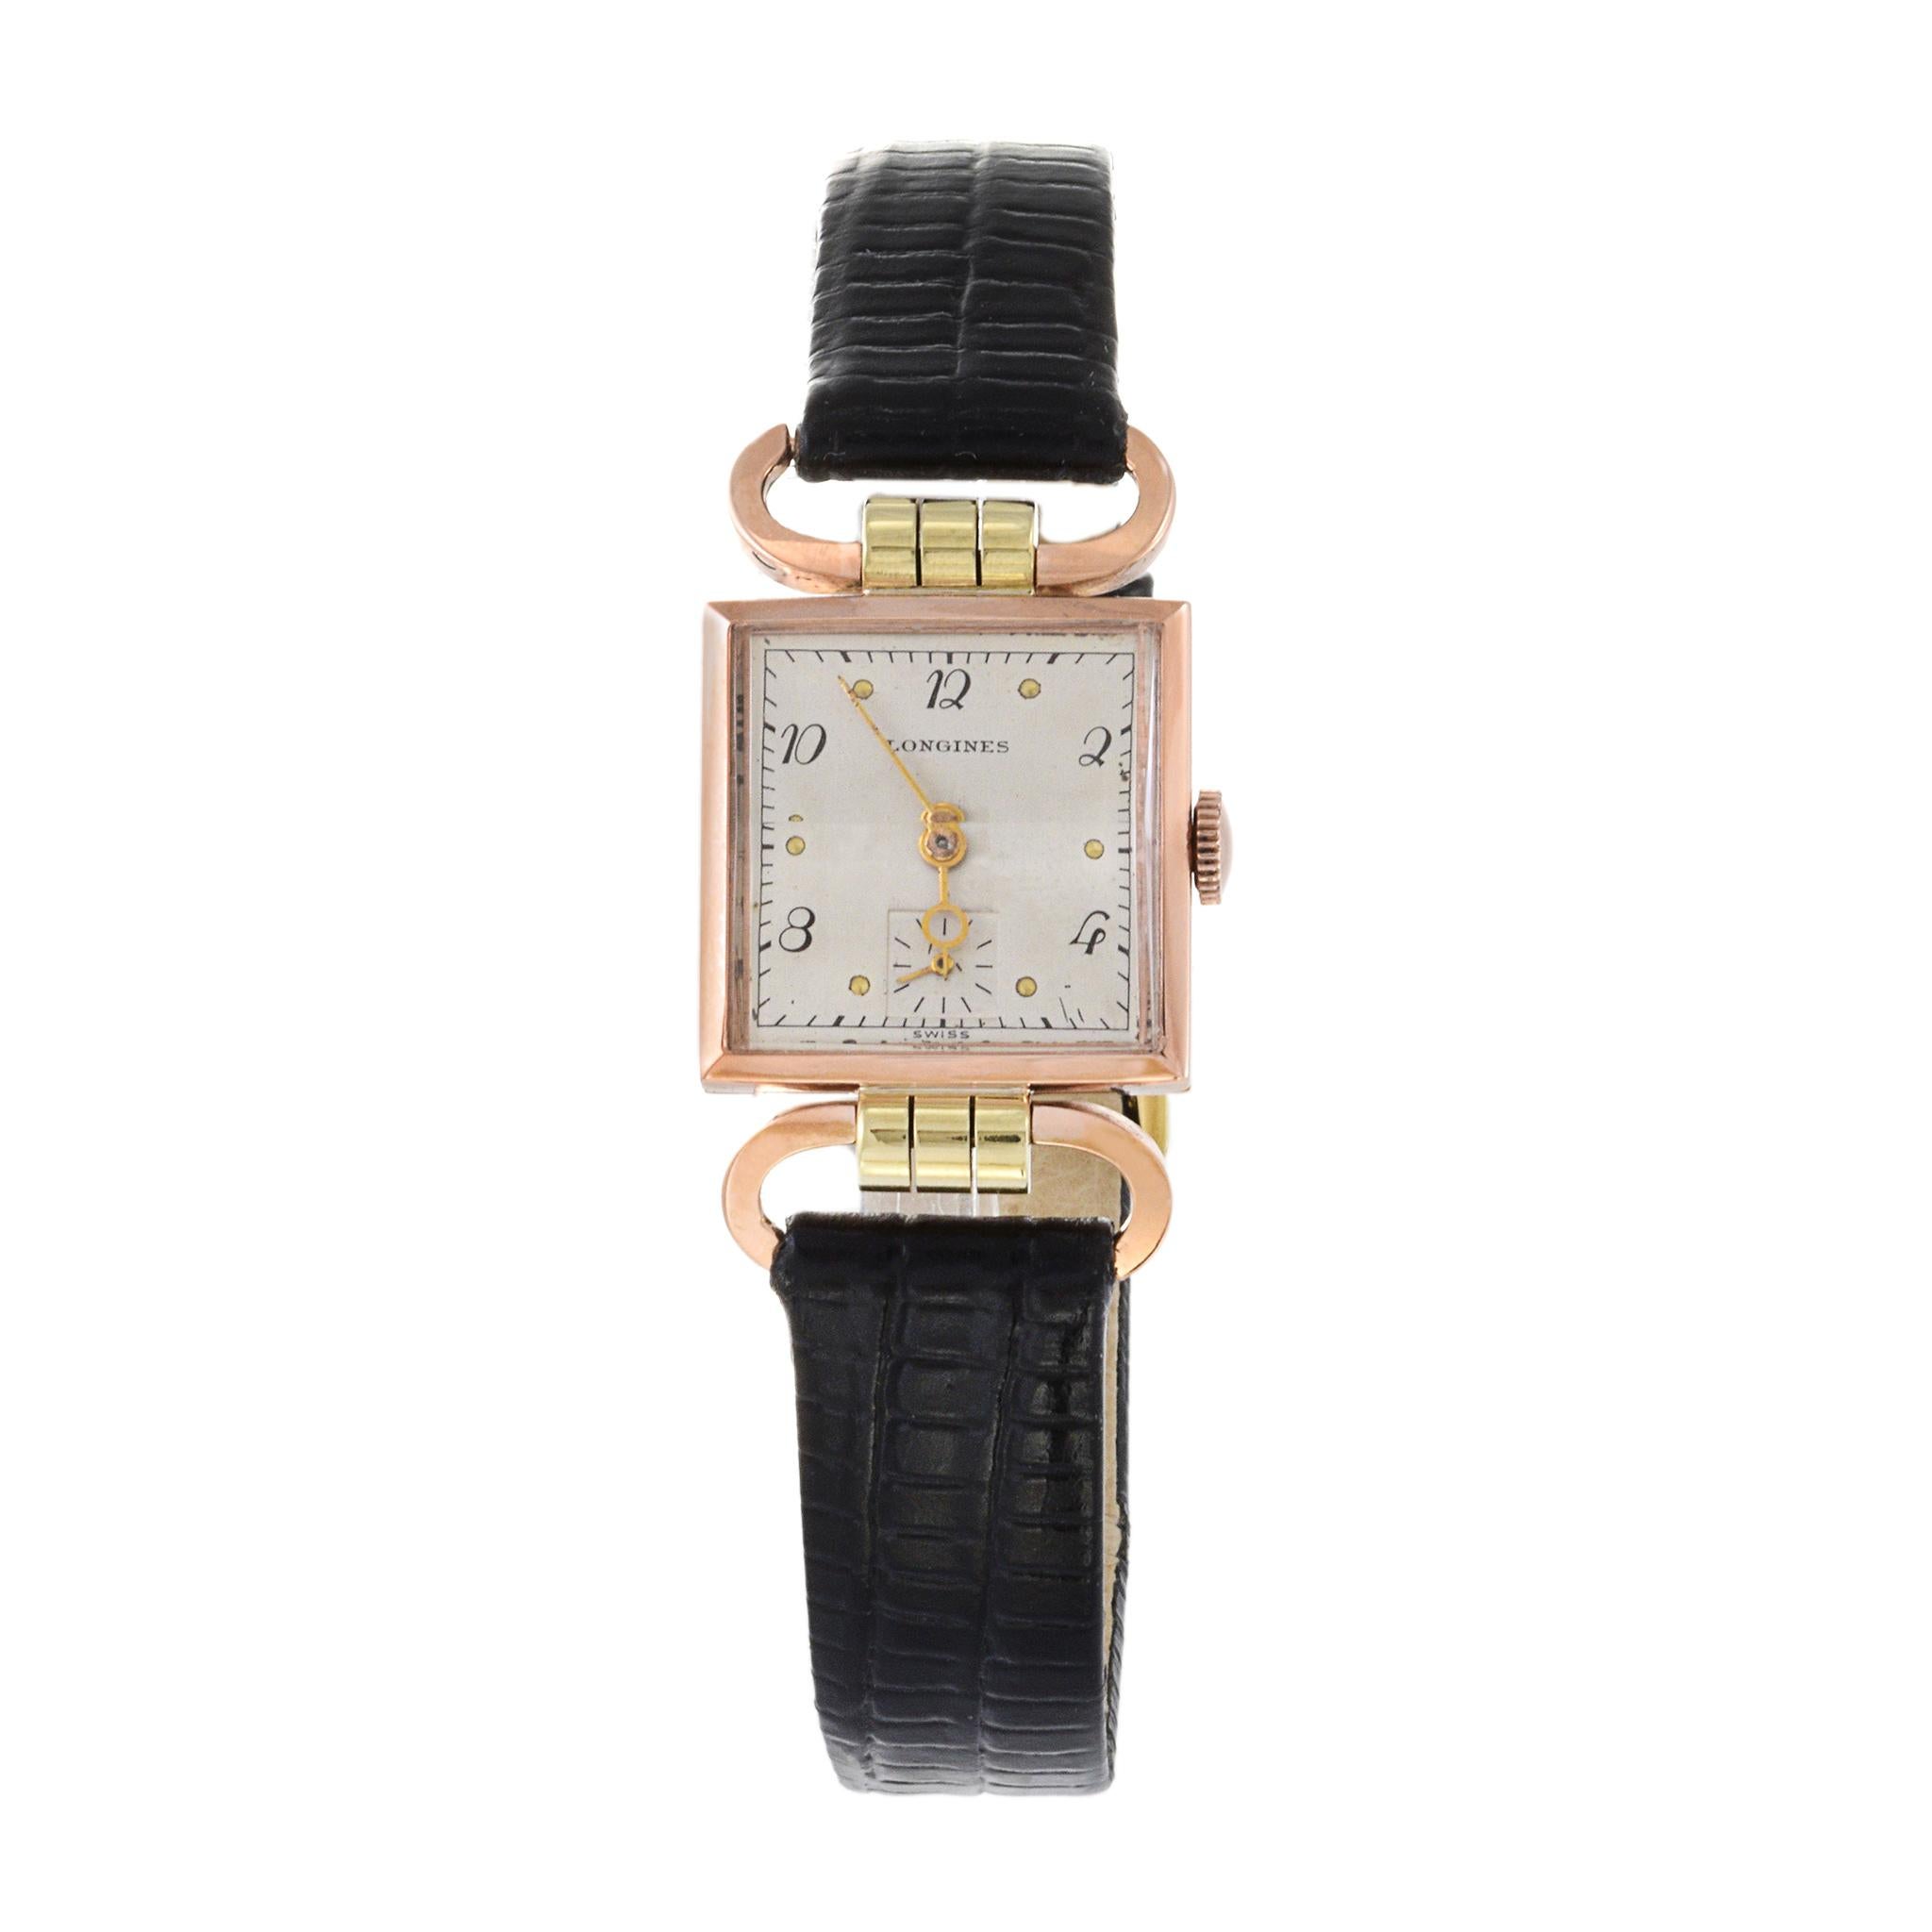 This is an elegant 1950's Longines tank watch in 14K rose and green gold. The most unique features of this watch are the opposable lugs and original beveled crystal. The case measures 21mm in diameter. It is 37mm lug to lug.

This watch is powered